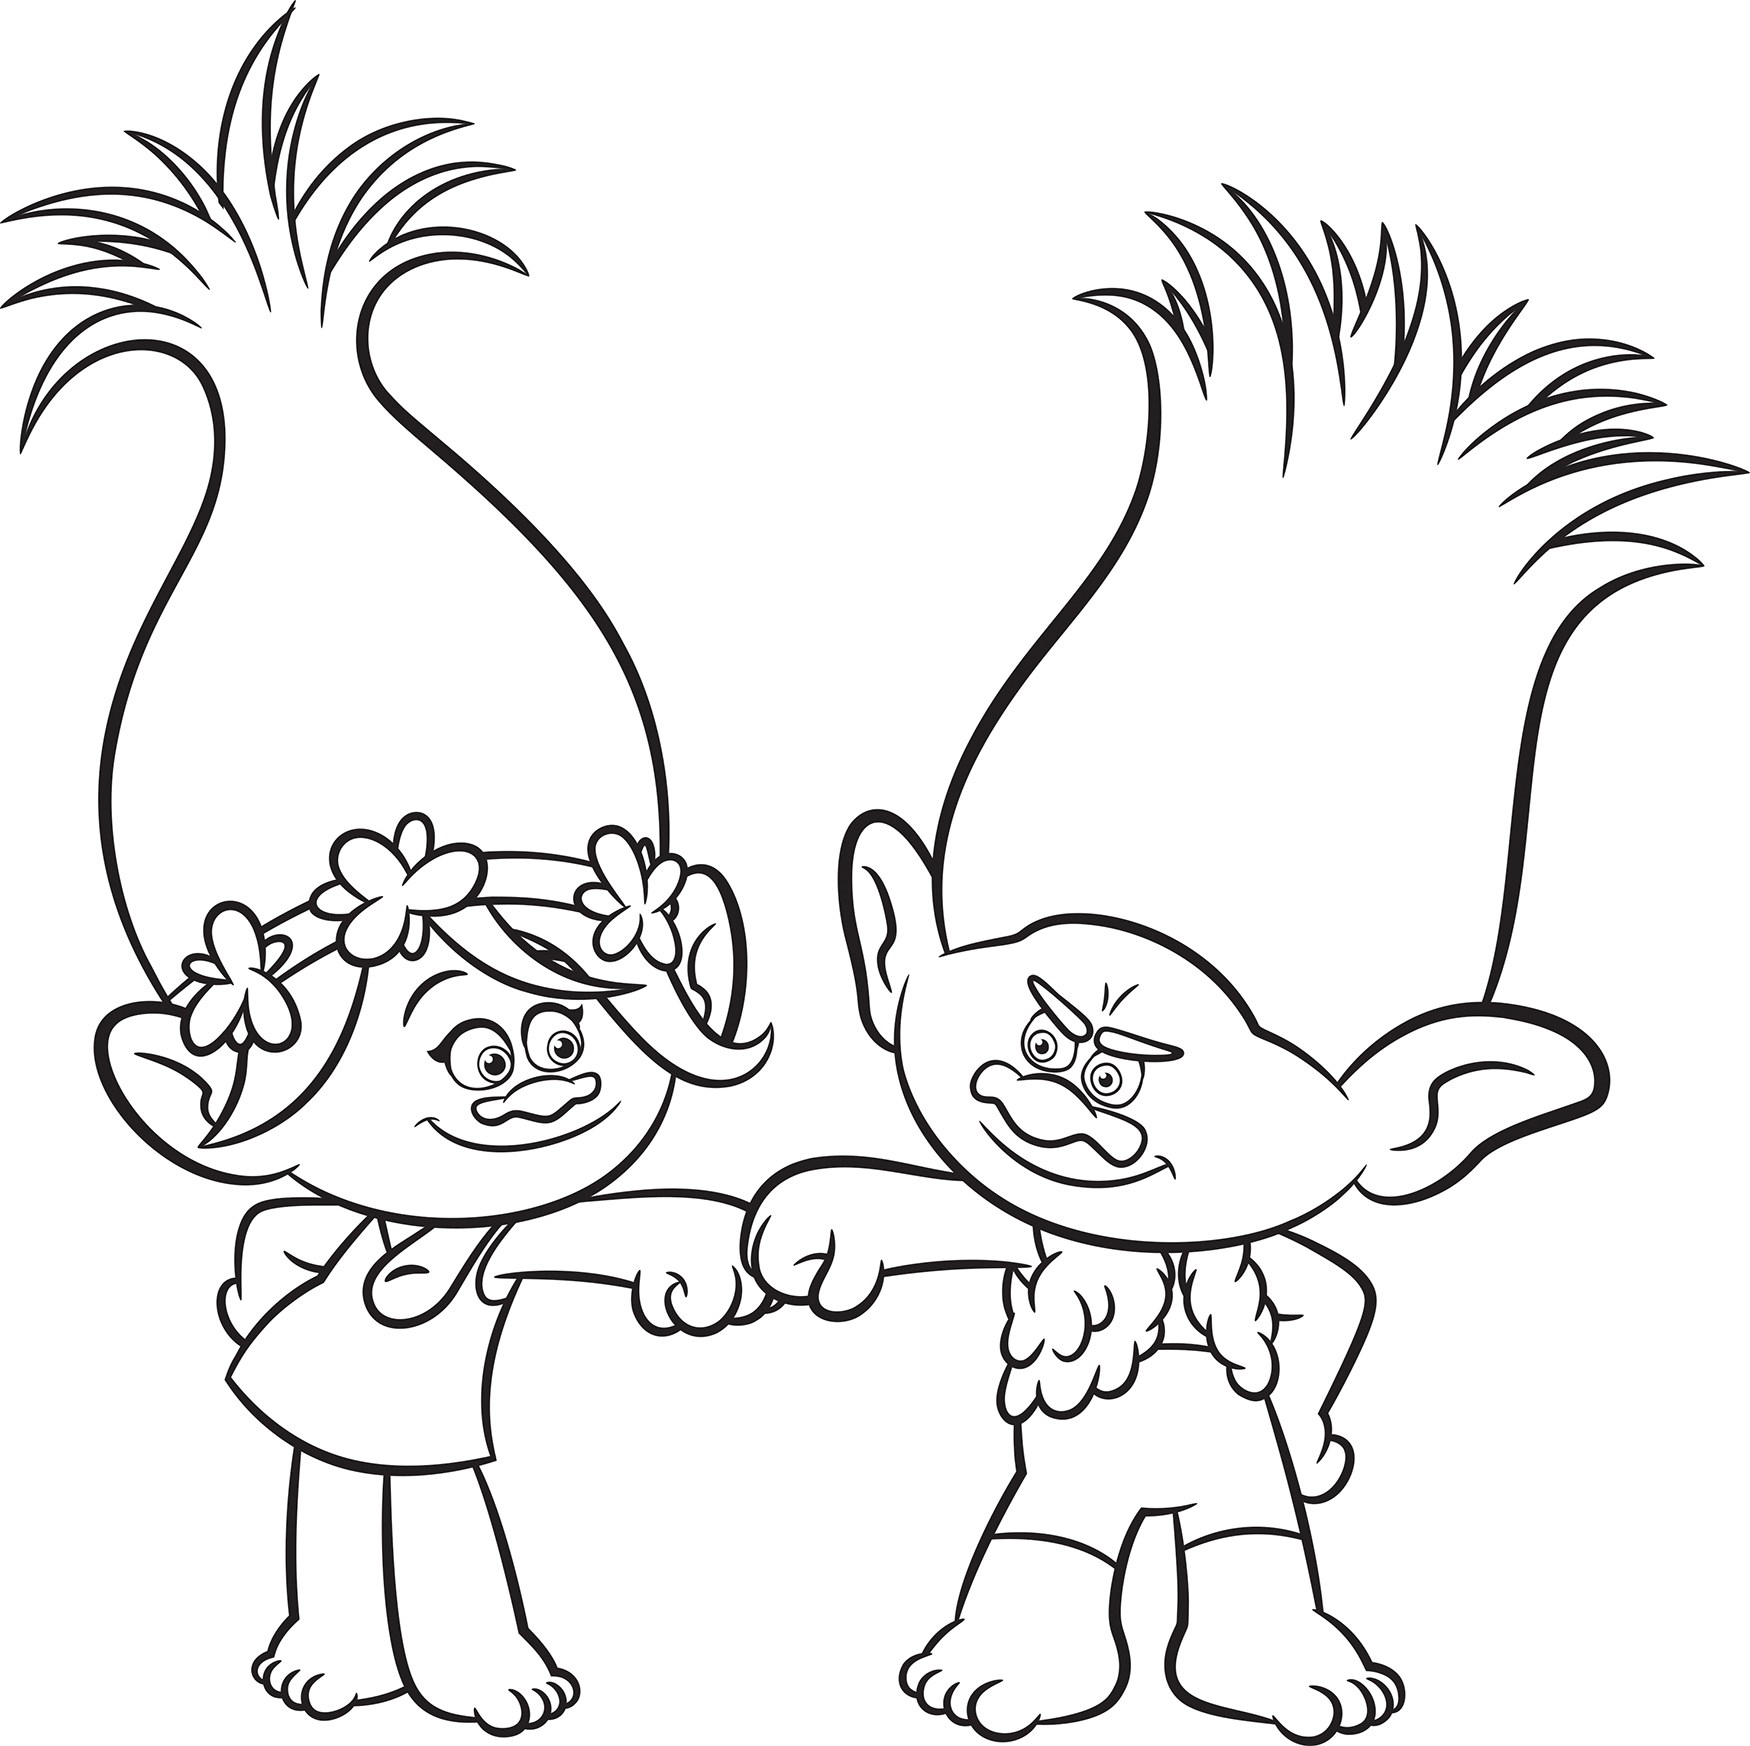 trolls-movie-coloring-pages-best-coloring-pages-for-kids